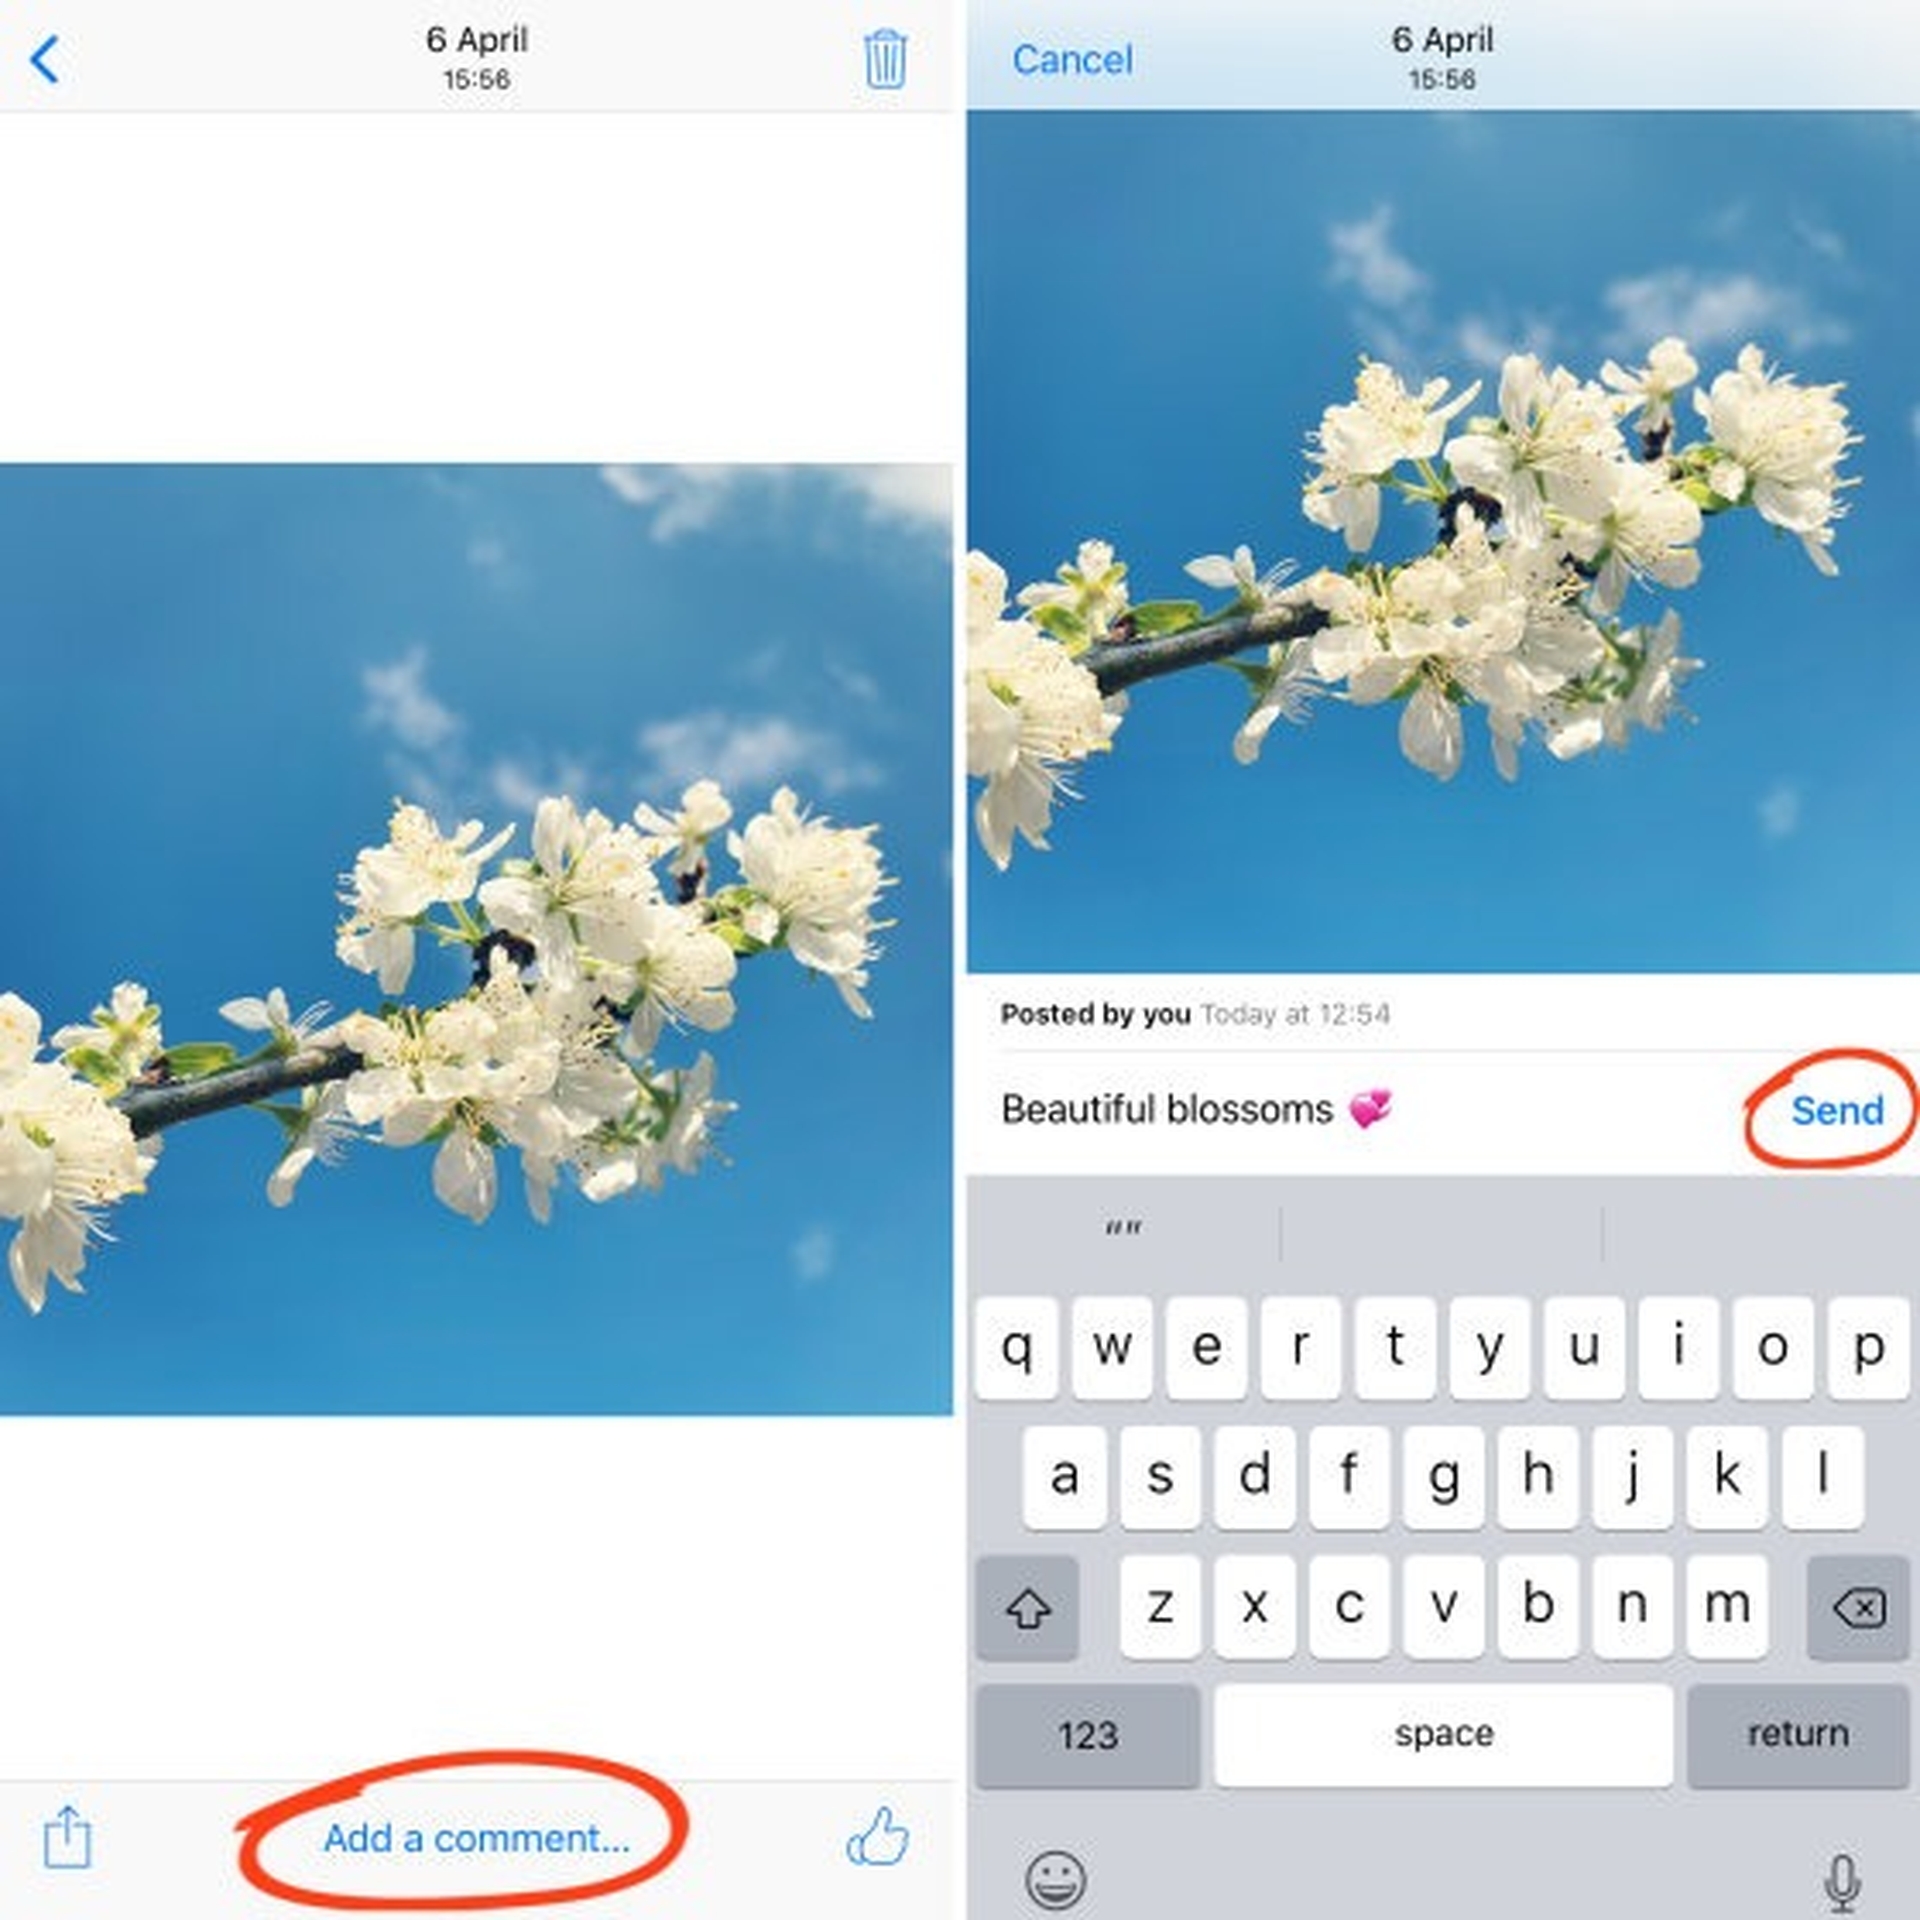 In this article, we are going to tell you how to comment on shared photo albums on iPhone, which is a built-in feature that not many knows about.